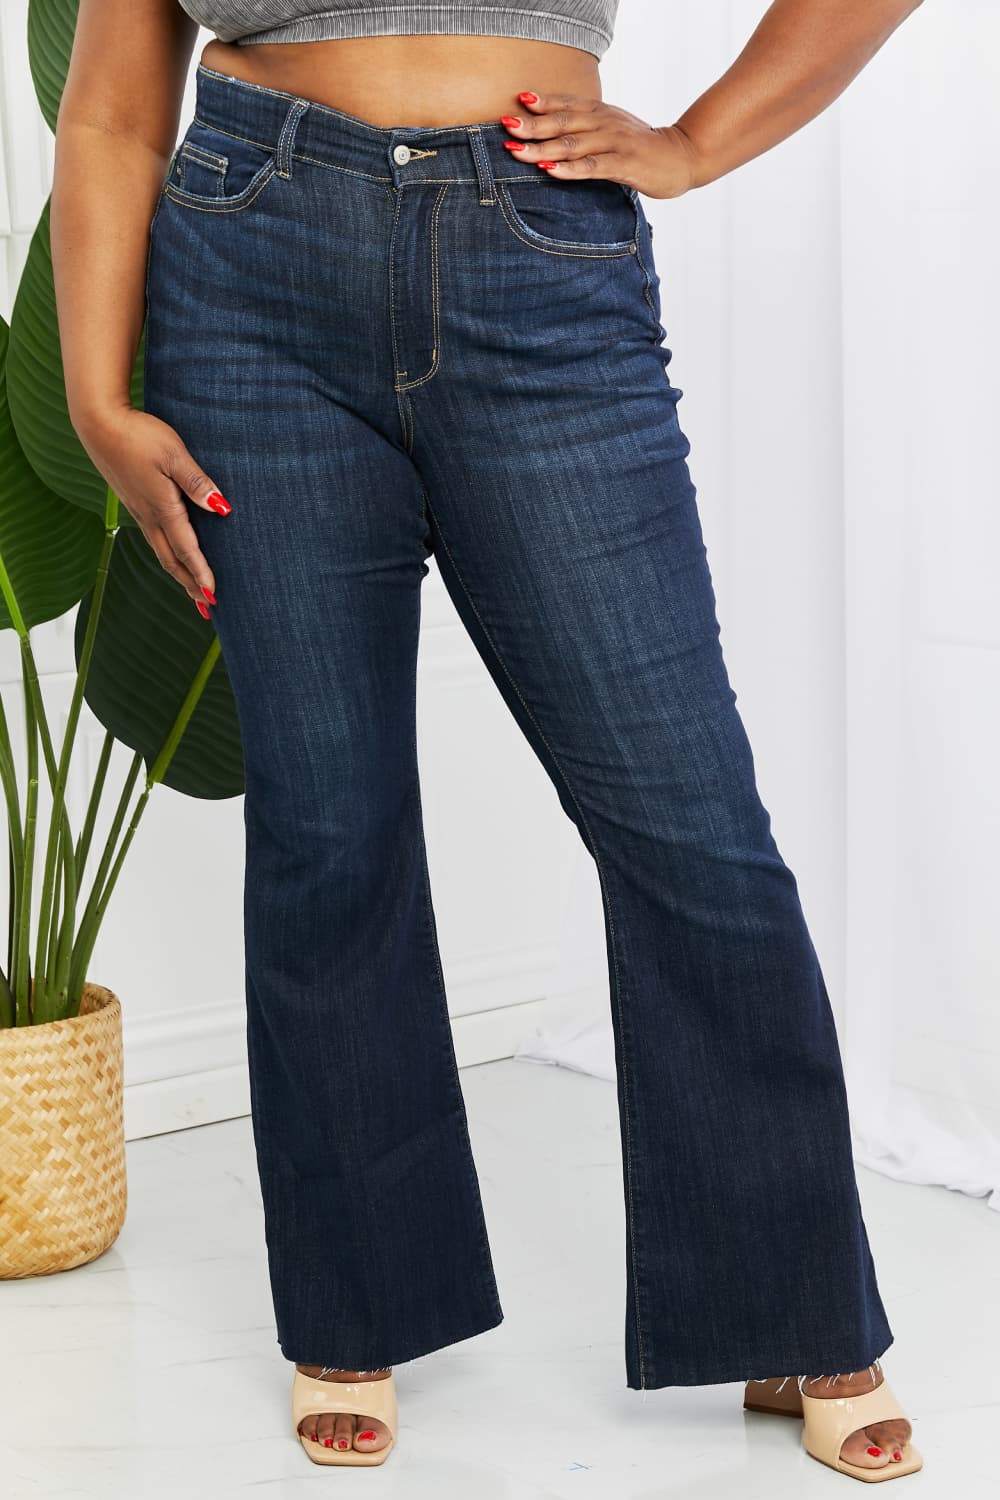 Judy Blue Tiffany Full Size Mid Rise Flare Jeans - Cheeky Chic Boutique